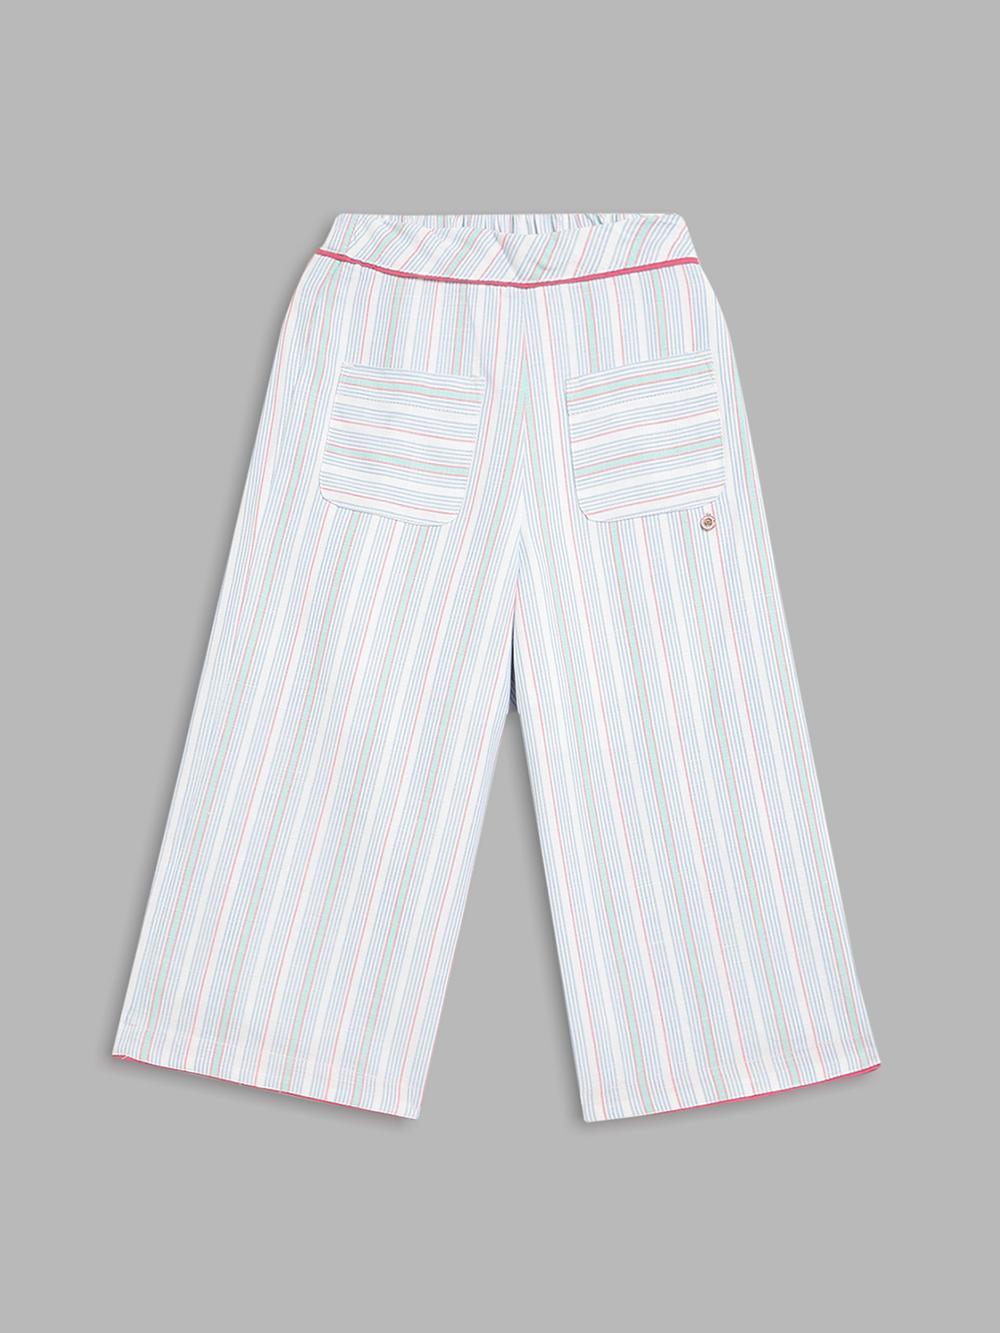 white relaxed fit striped trouser